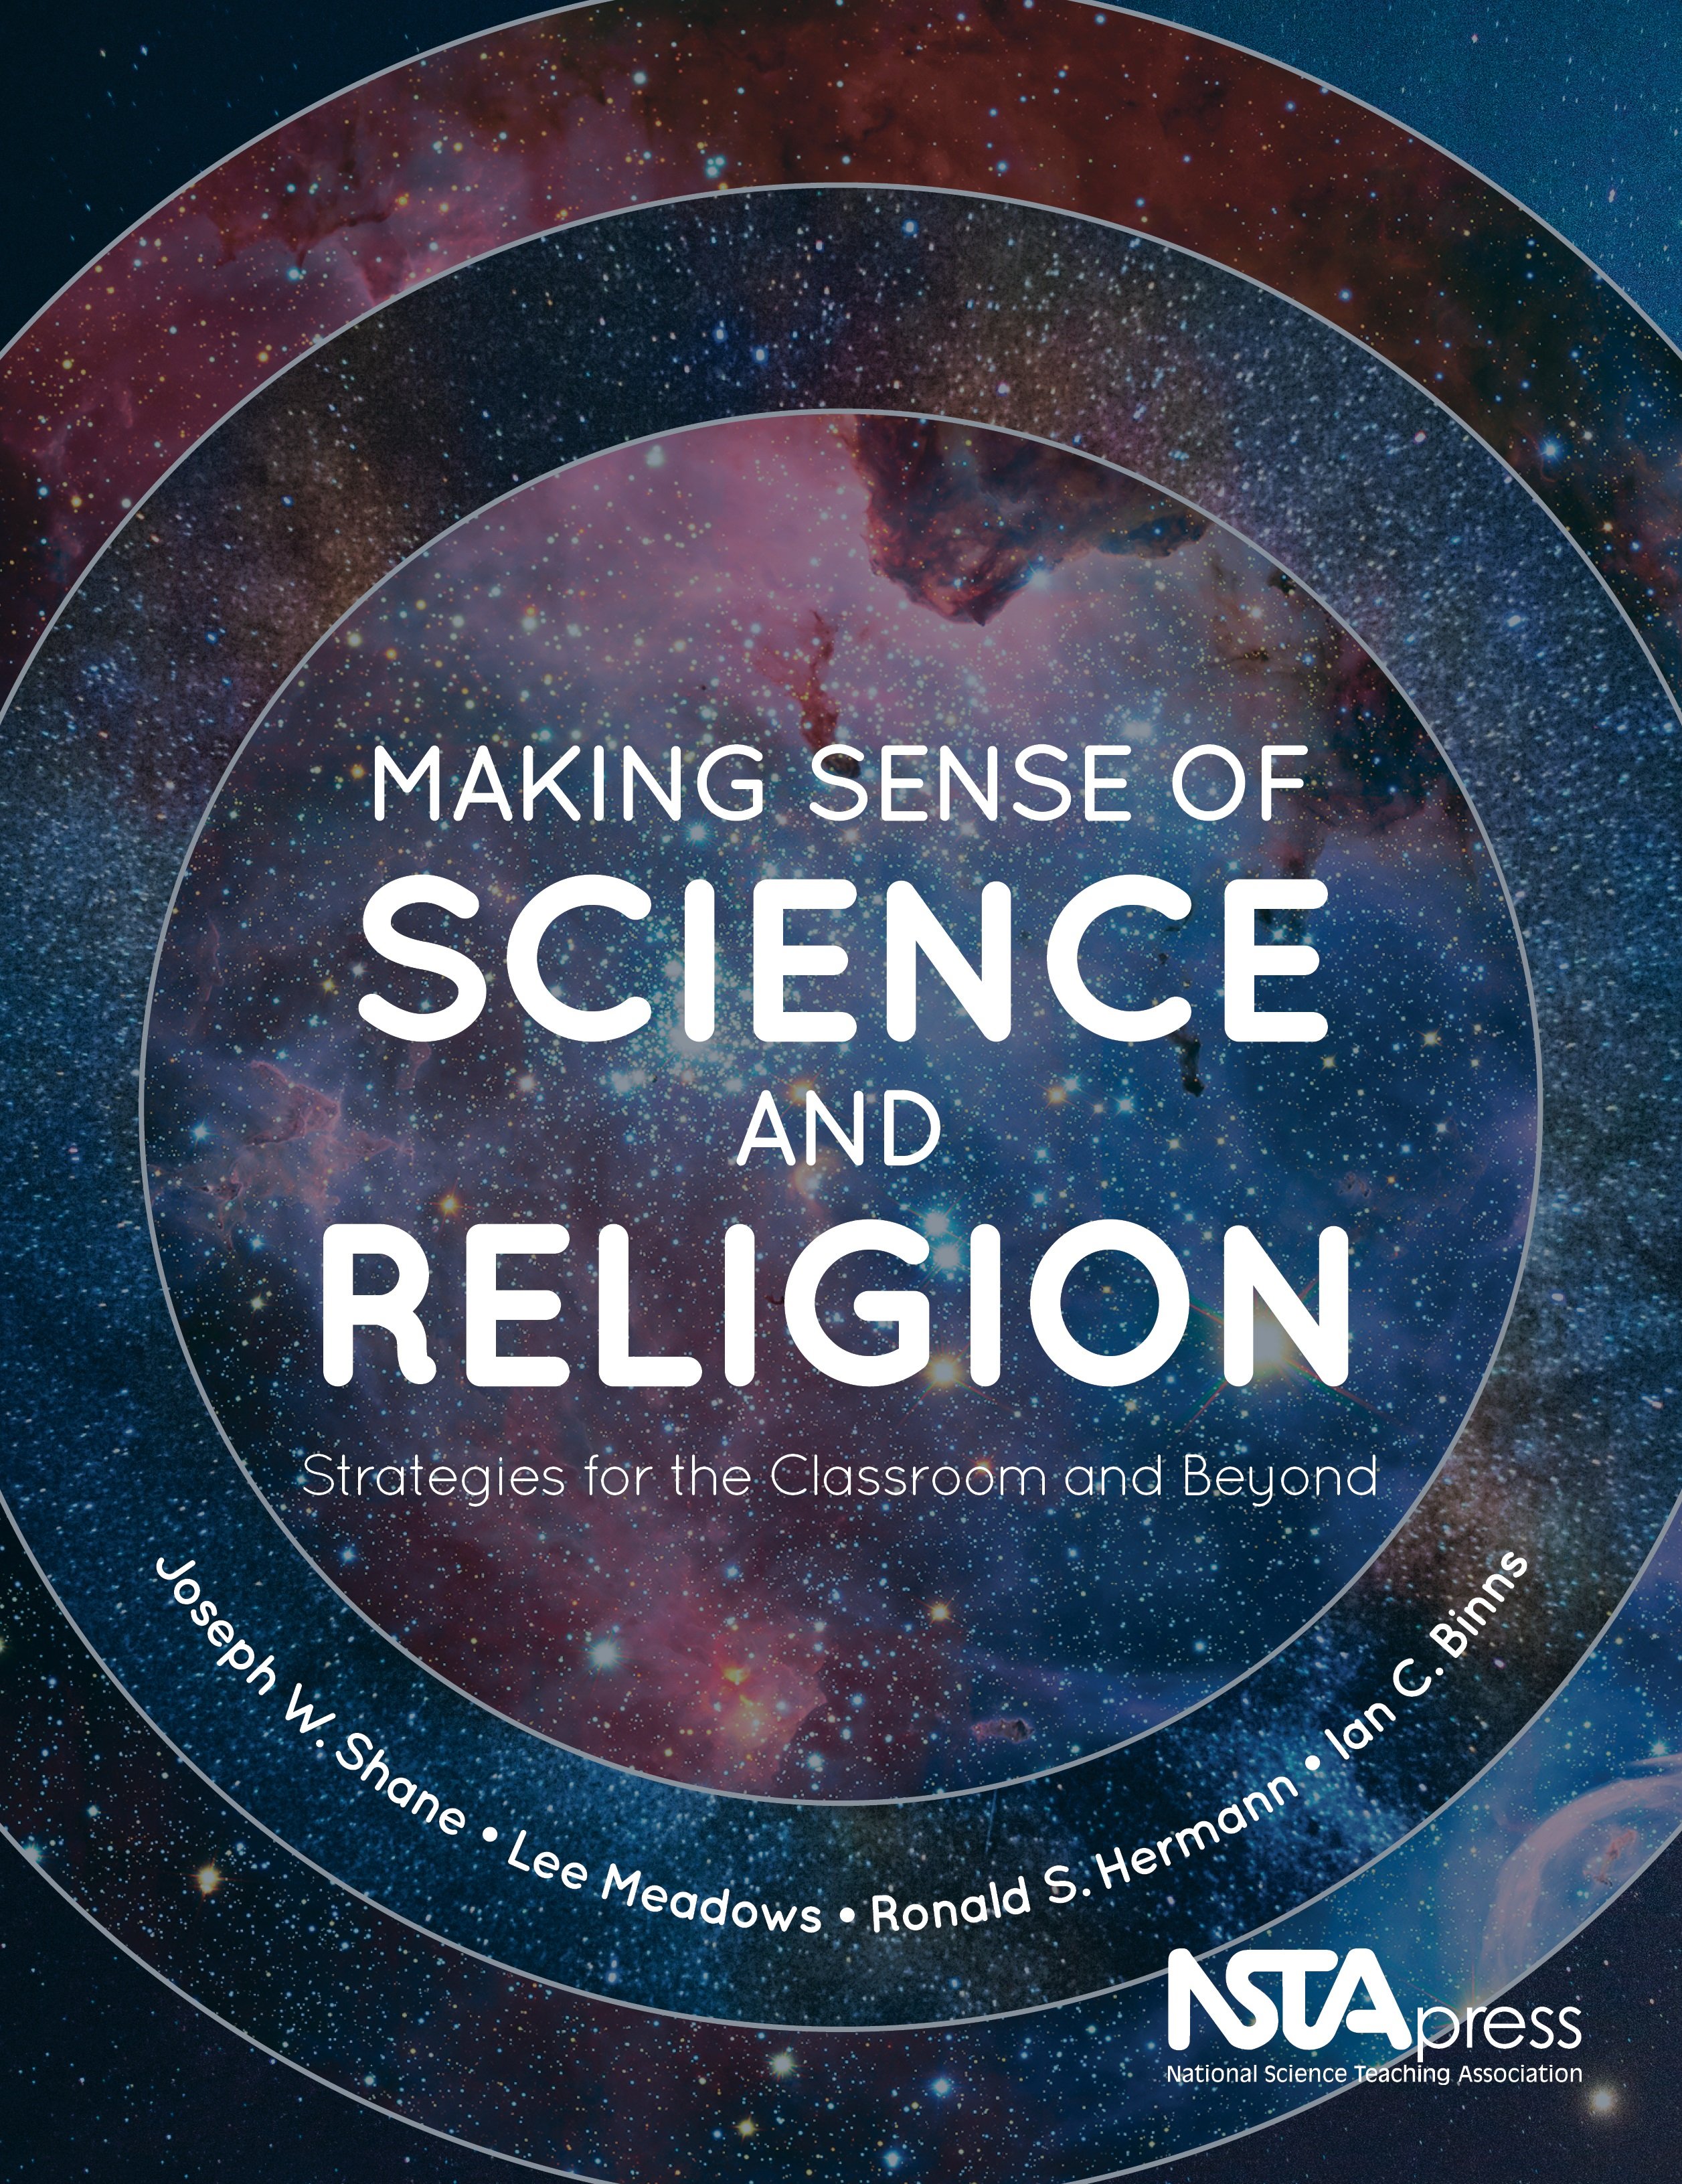 religion and science research article